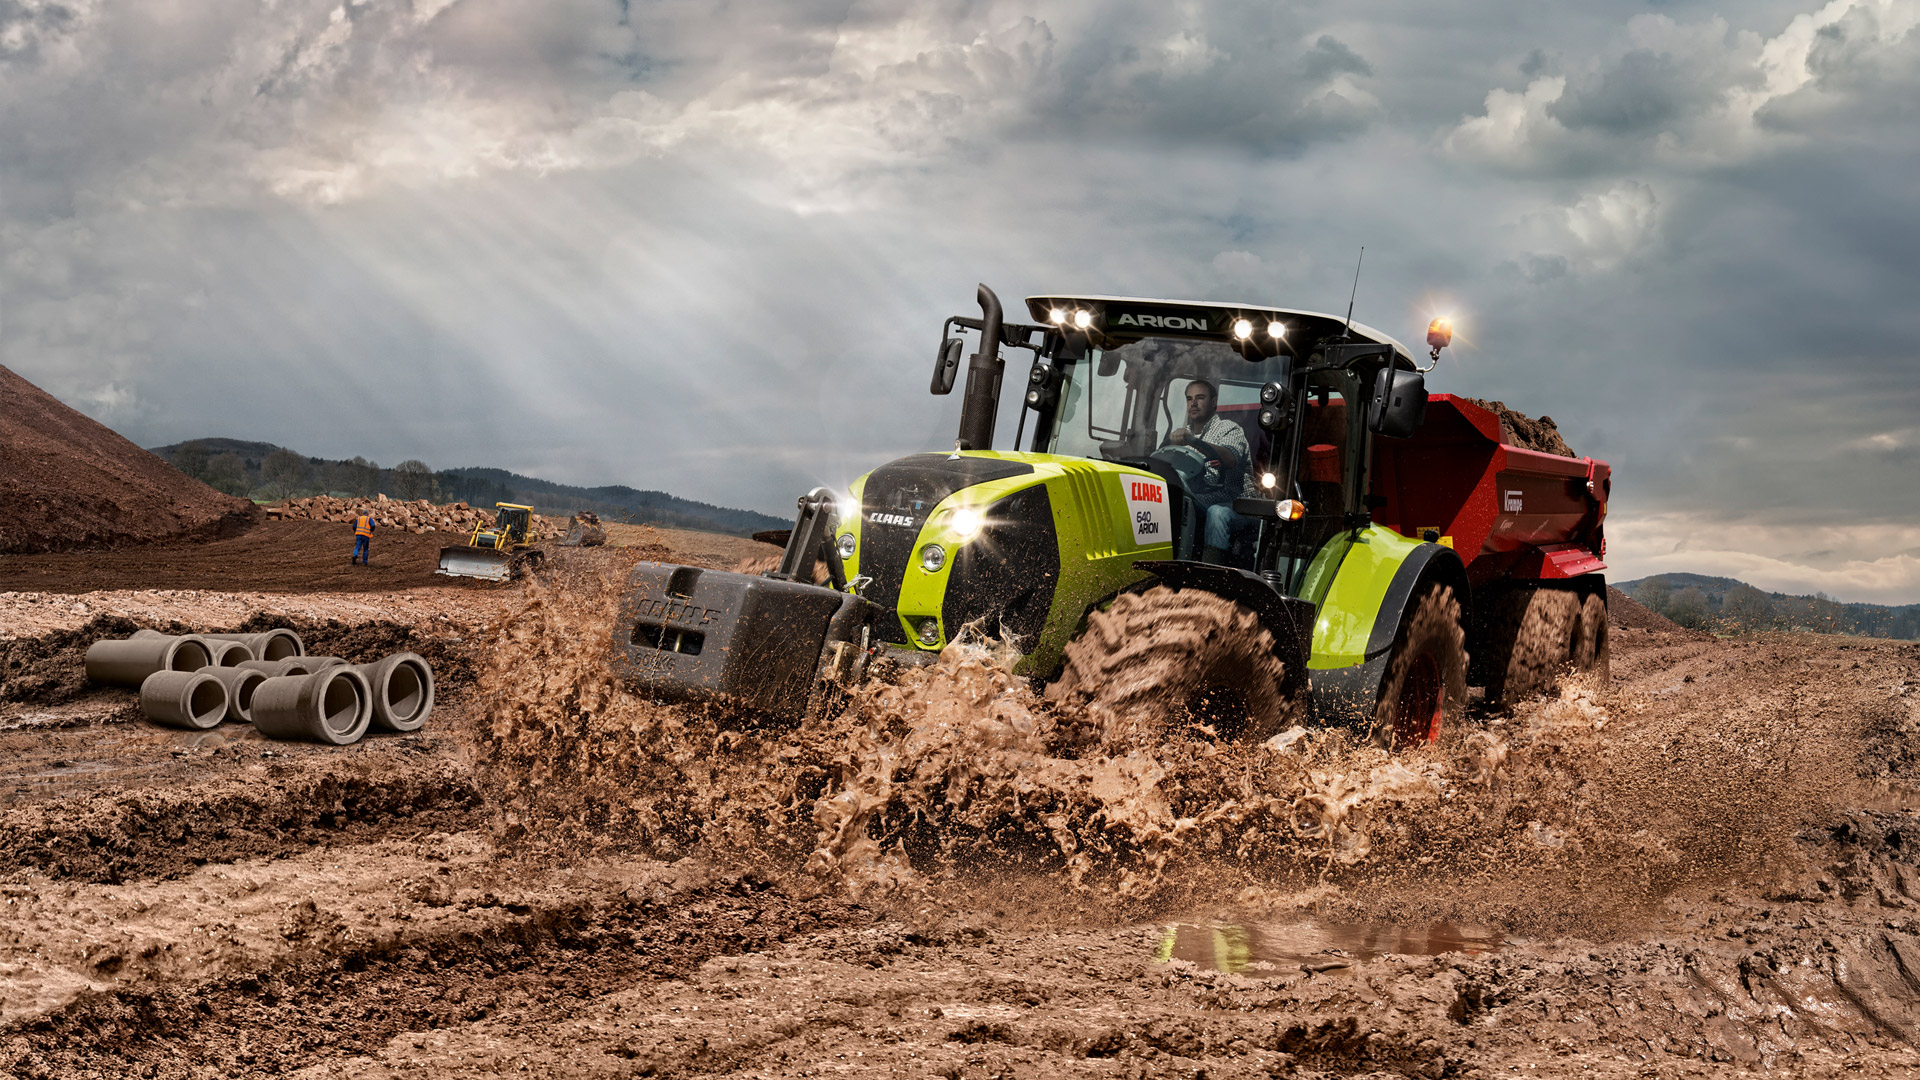 Claas Backgrounds, Compatible - PC, Mobile, Gadgets| 1920x1080 px